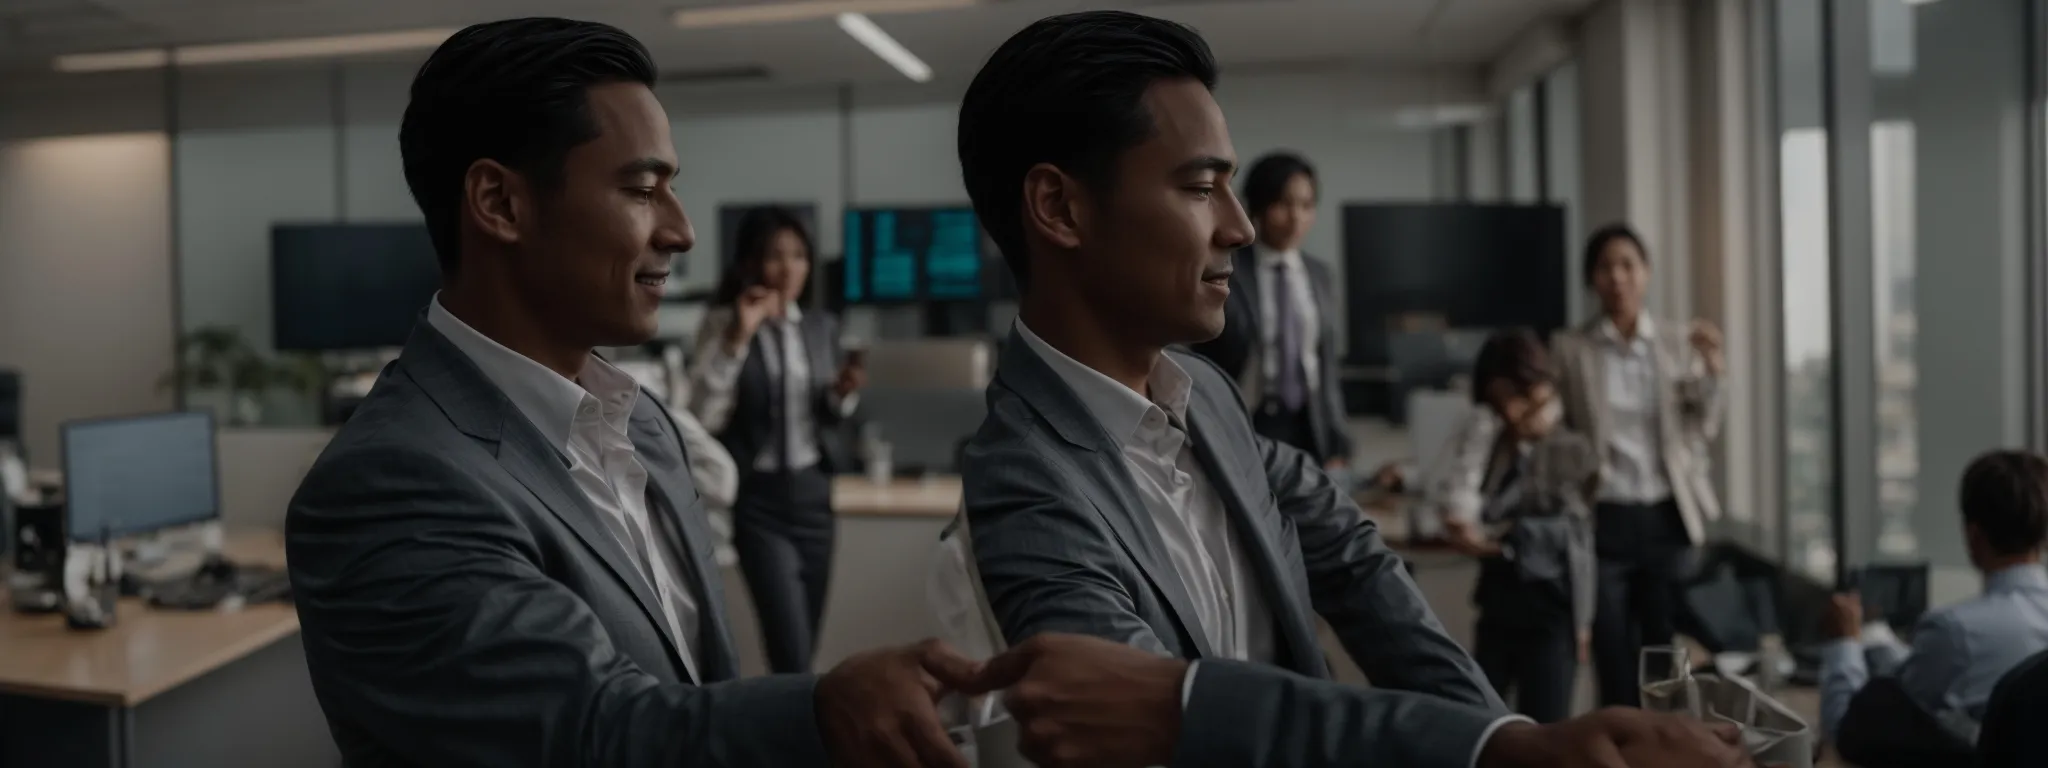 a businessperson shaking hands with a partner in a modern office setting, symbolizing partnership and trust.